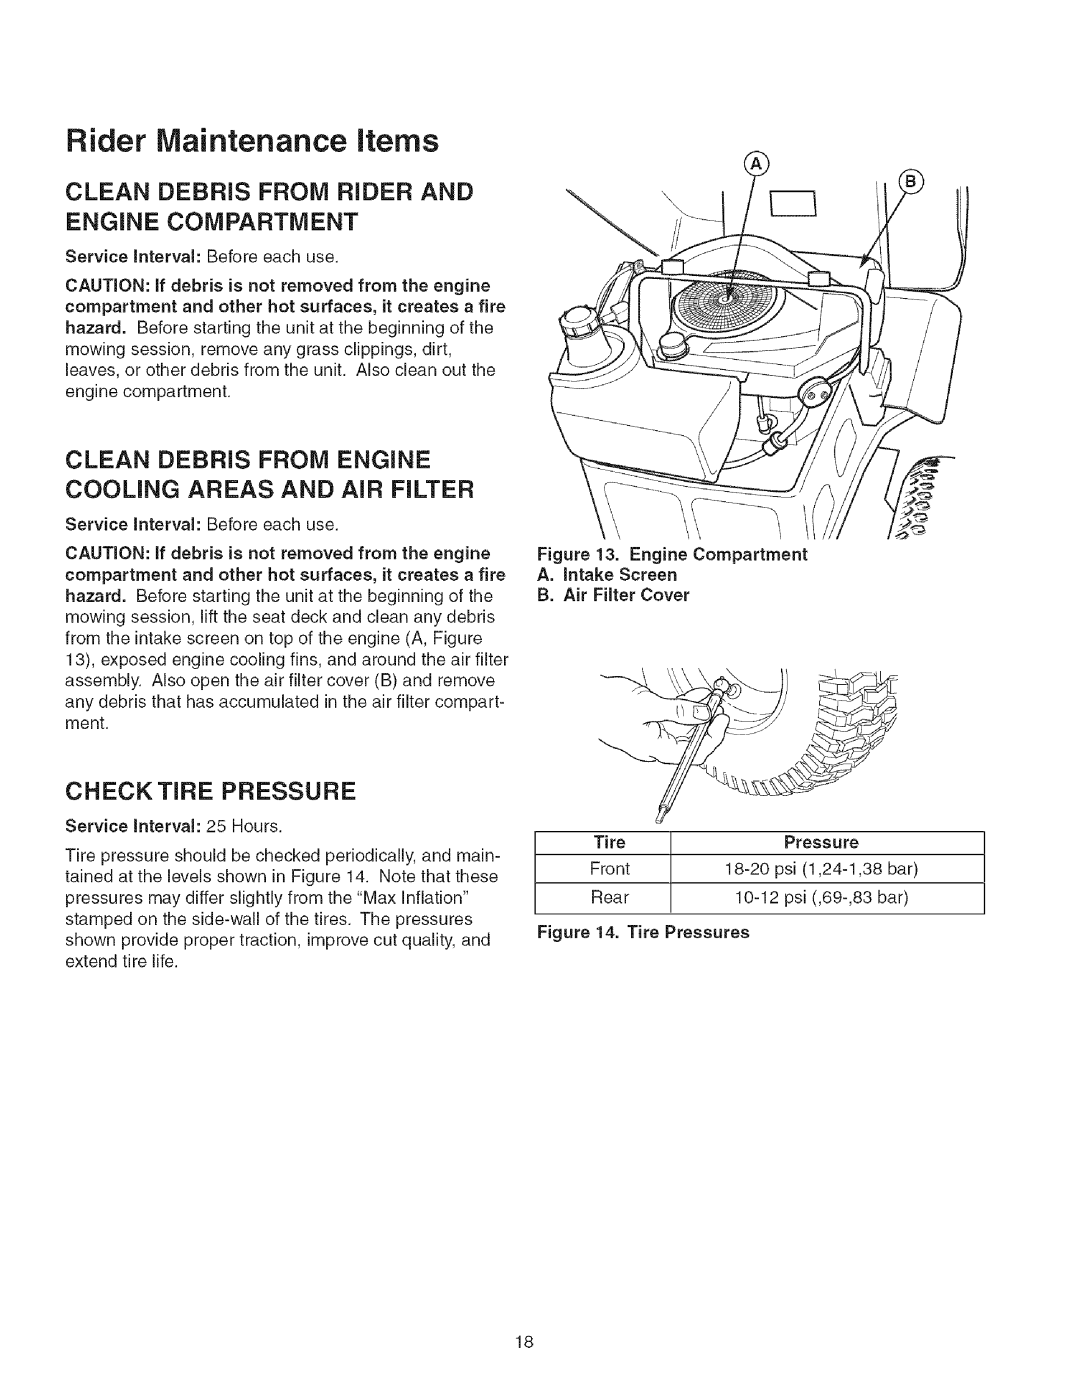 Craftsman 107.27768 manual Rider Maintenance items, Clean Debris From Rider And Engine Compartment, Checktire Pressure 